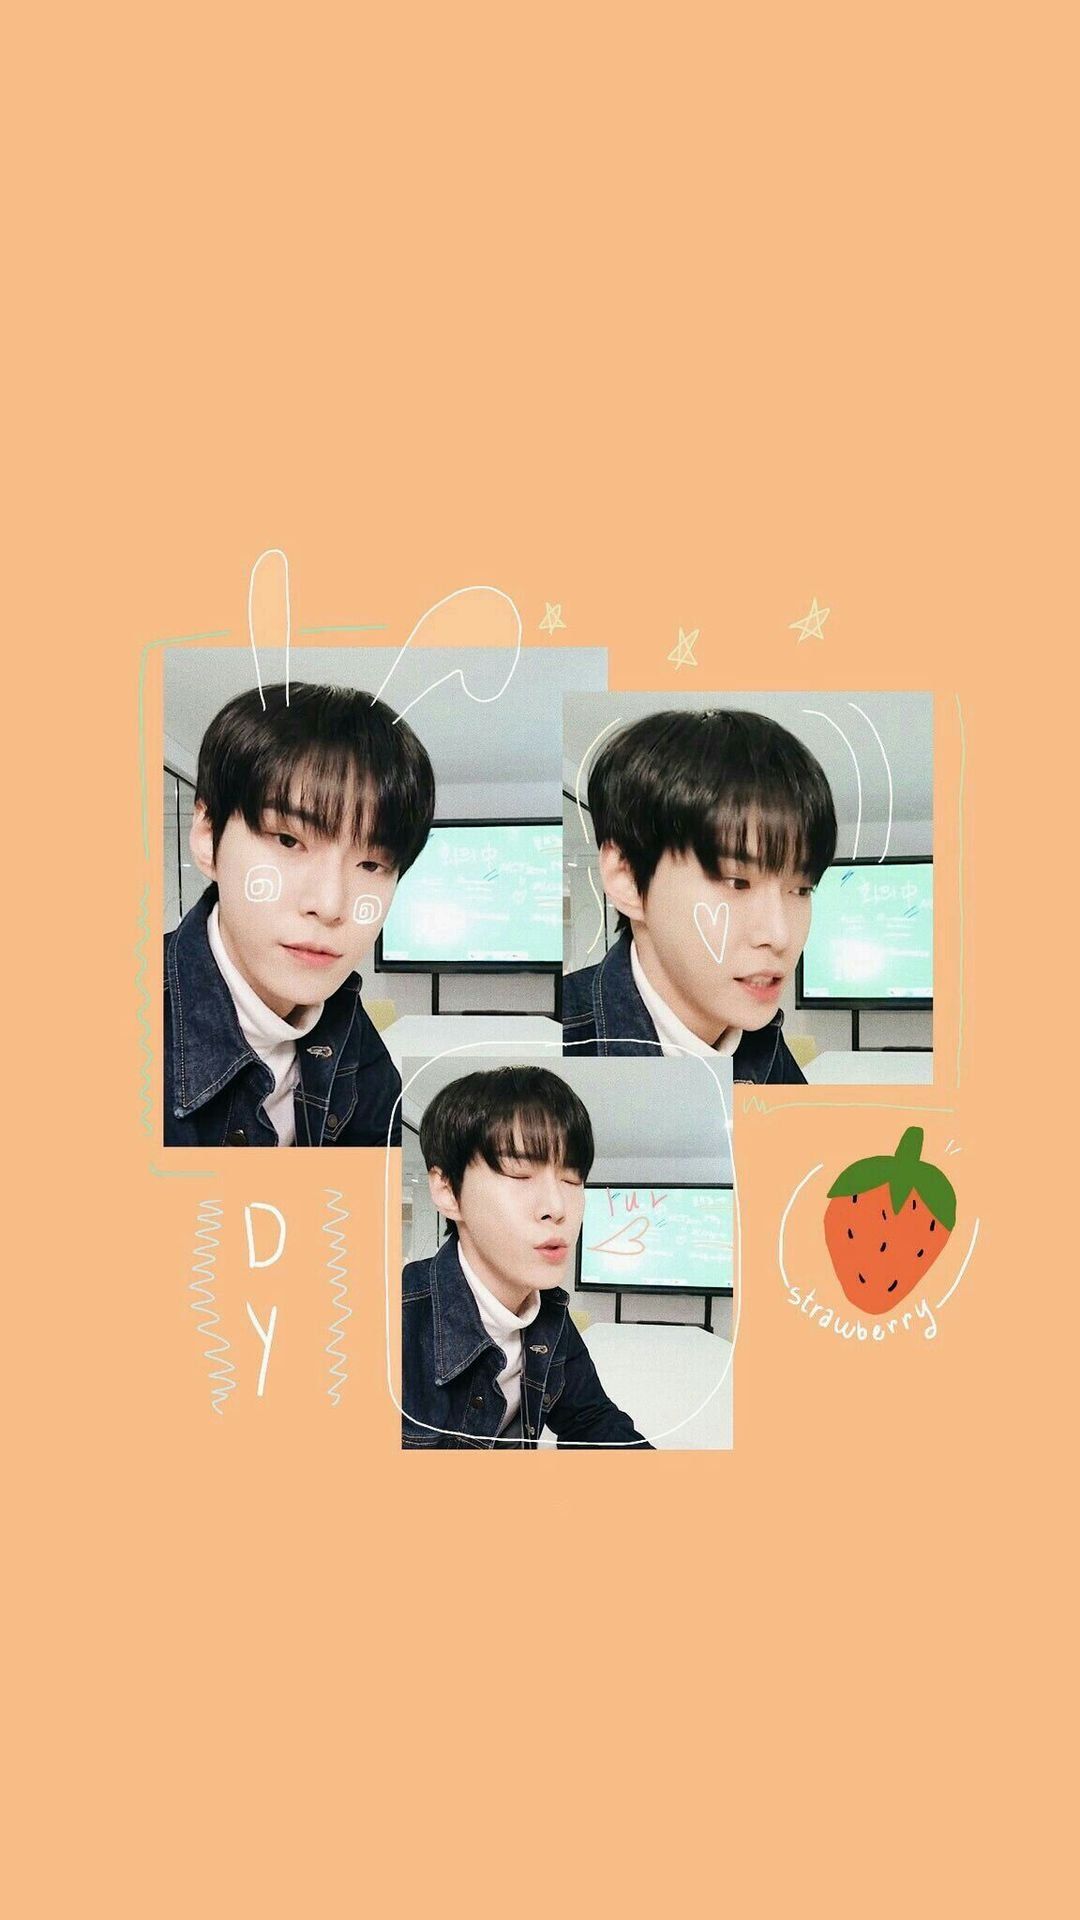 NCT ♡ WALLPAPER - Doyoung, Aesthetic